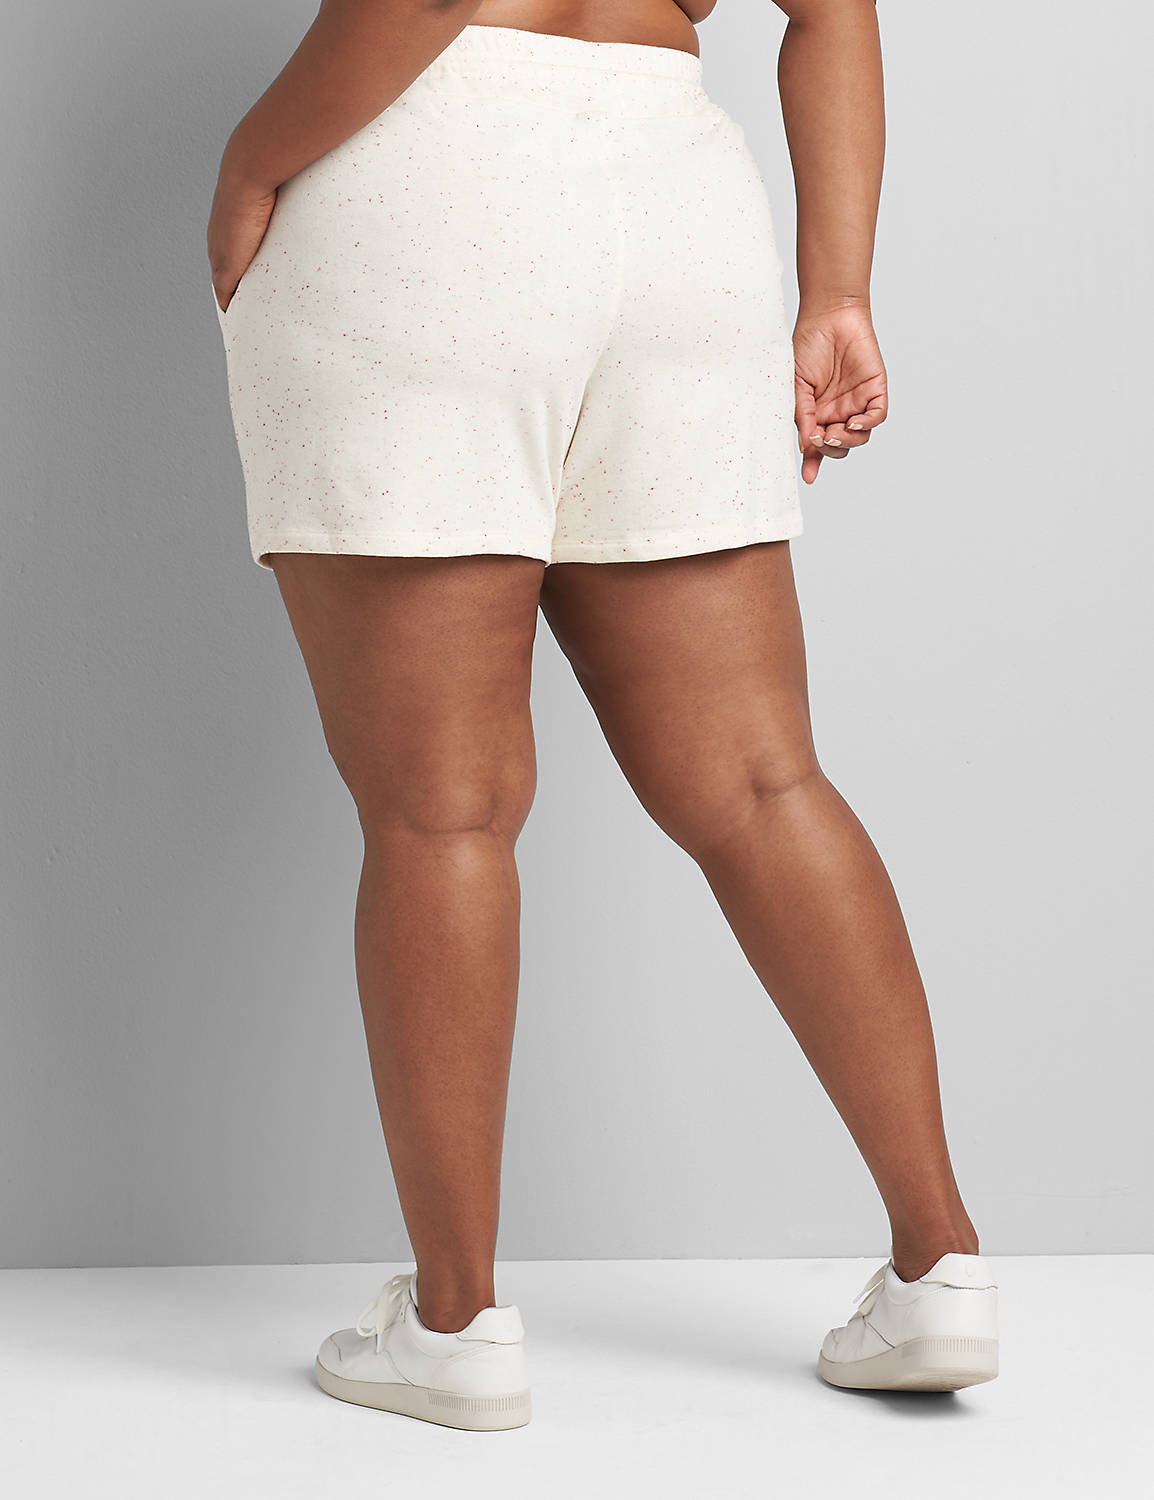 Pull On French Terry Short  S 1120474:Ascena White:38/40 Product Image 2